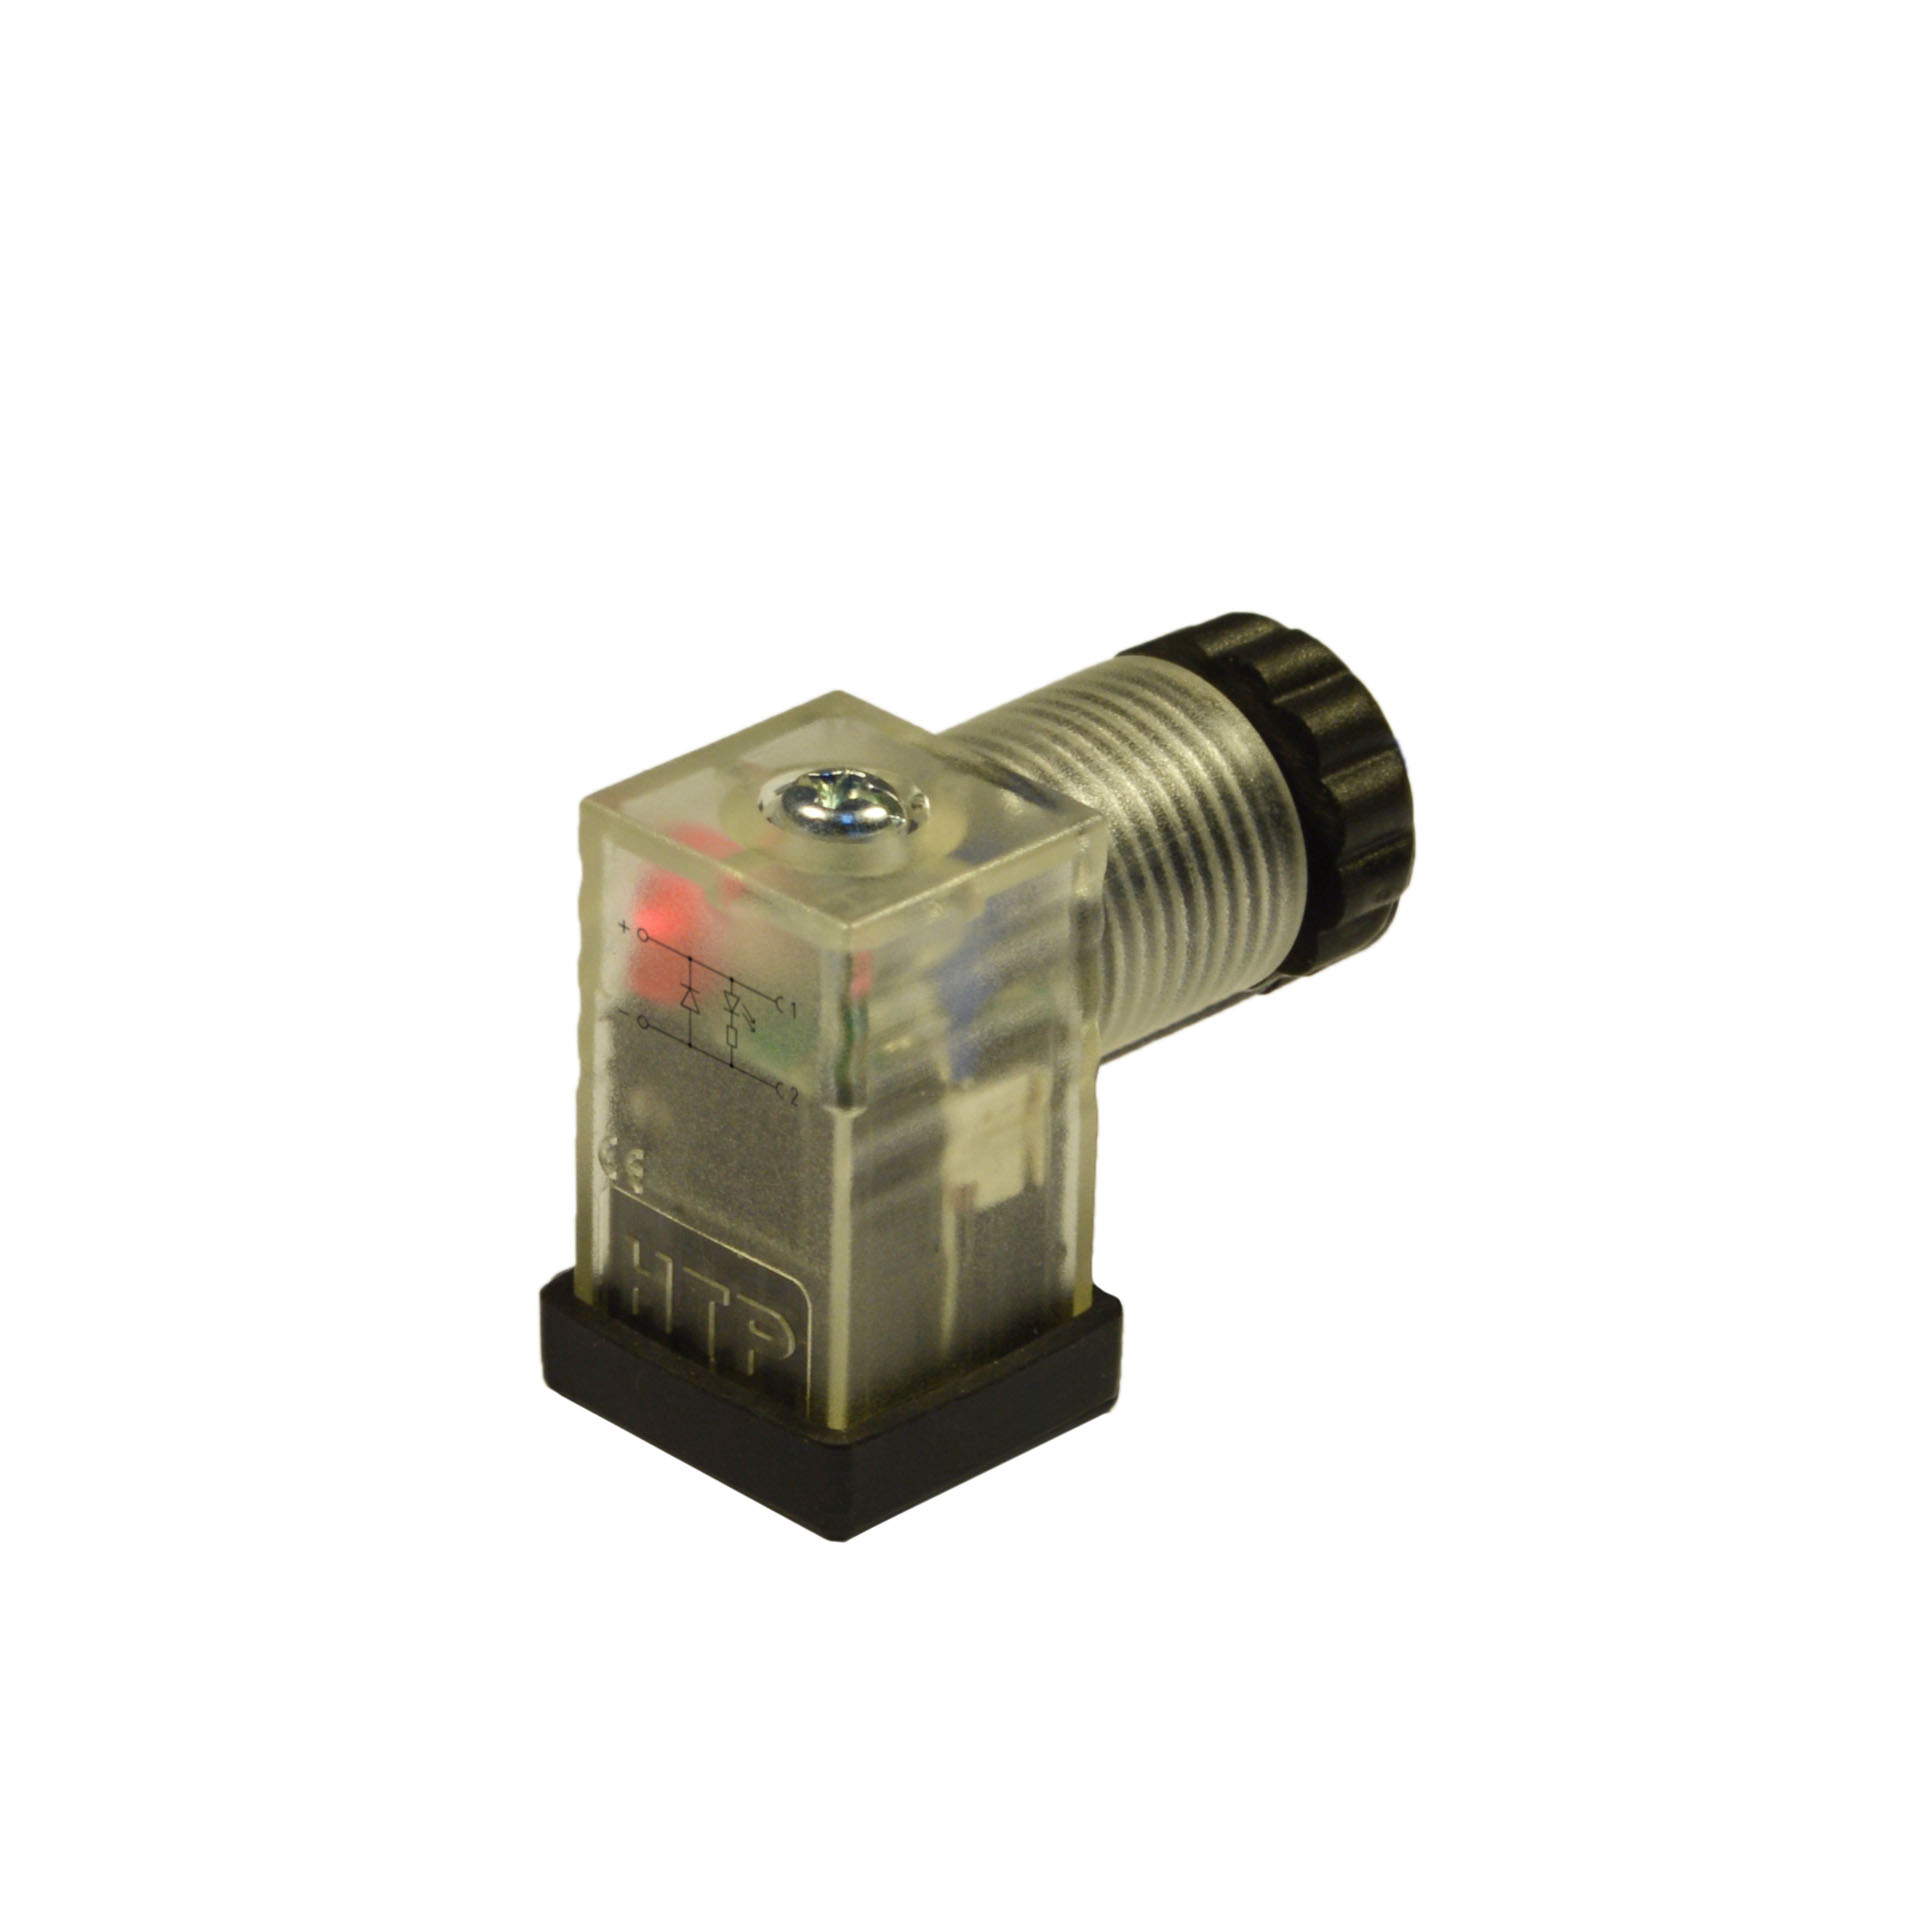 EN175301-803(typeC)field attachable,2p+PE(h.6),red LED+diode,24VDC,PG7